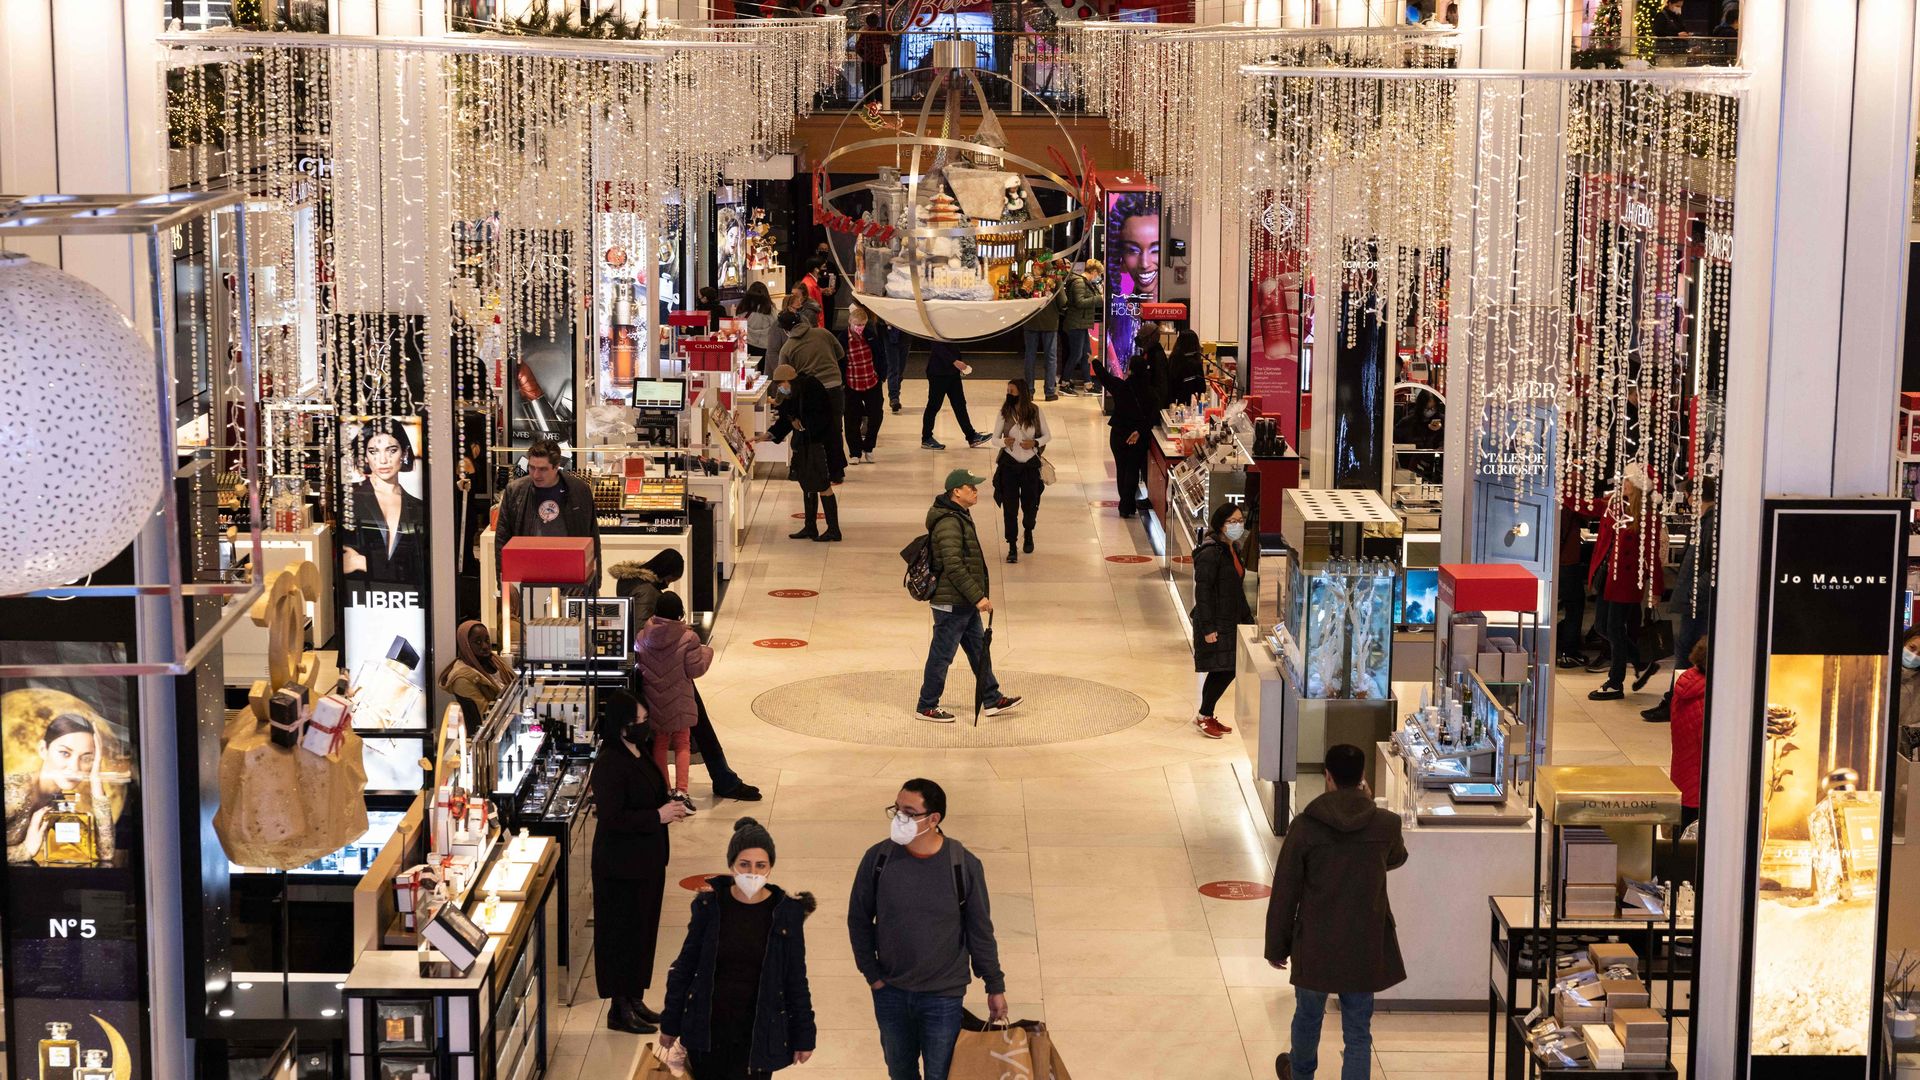 Shoppers browse Coach handbags in the Macy's Herald Square